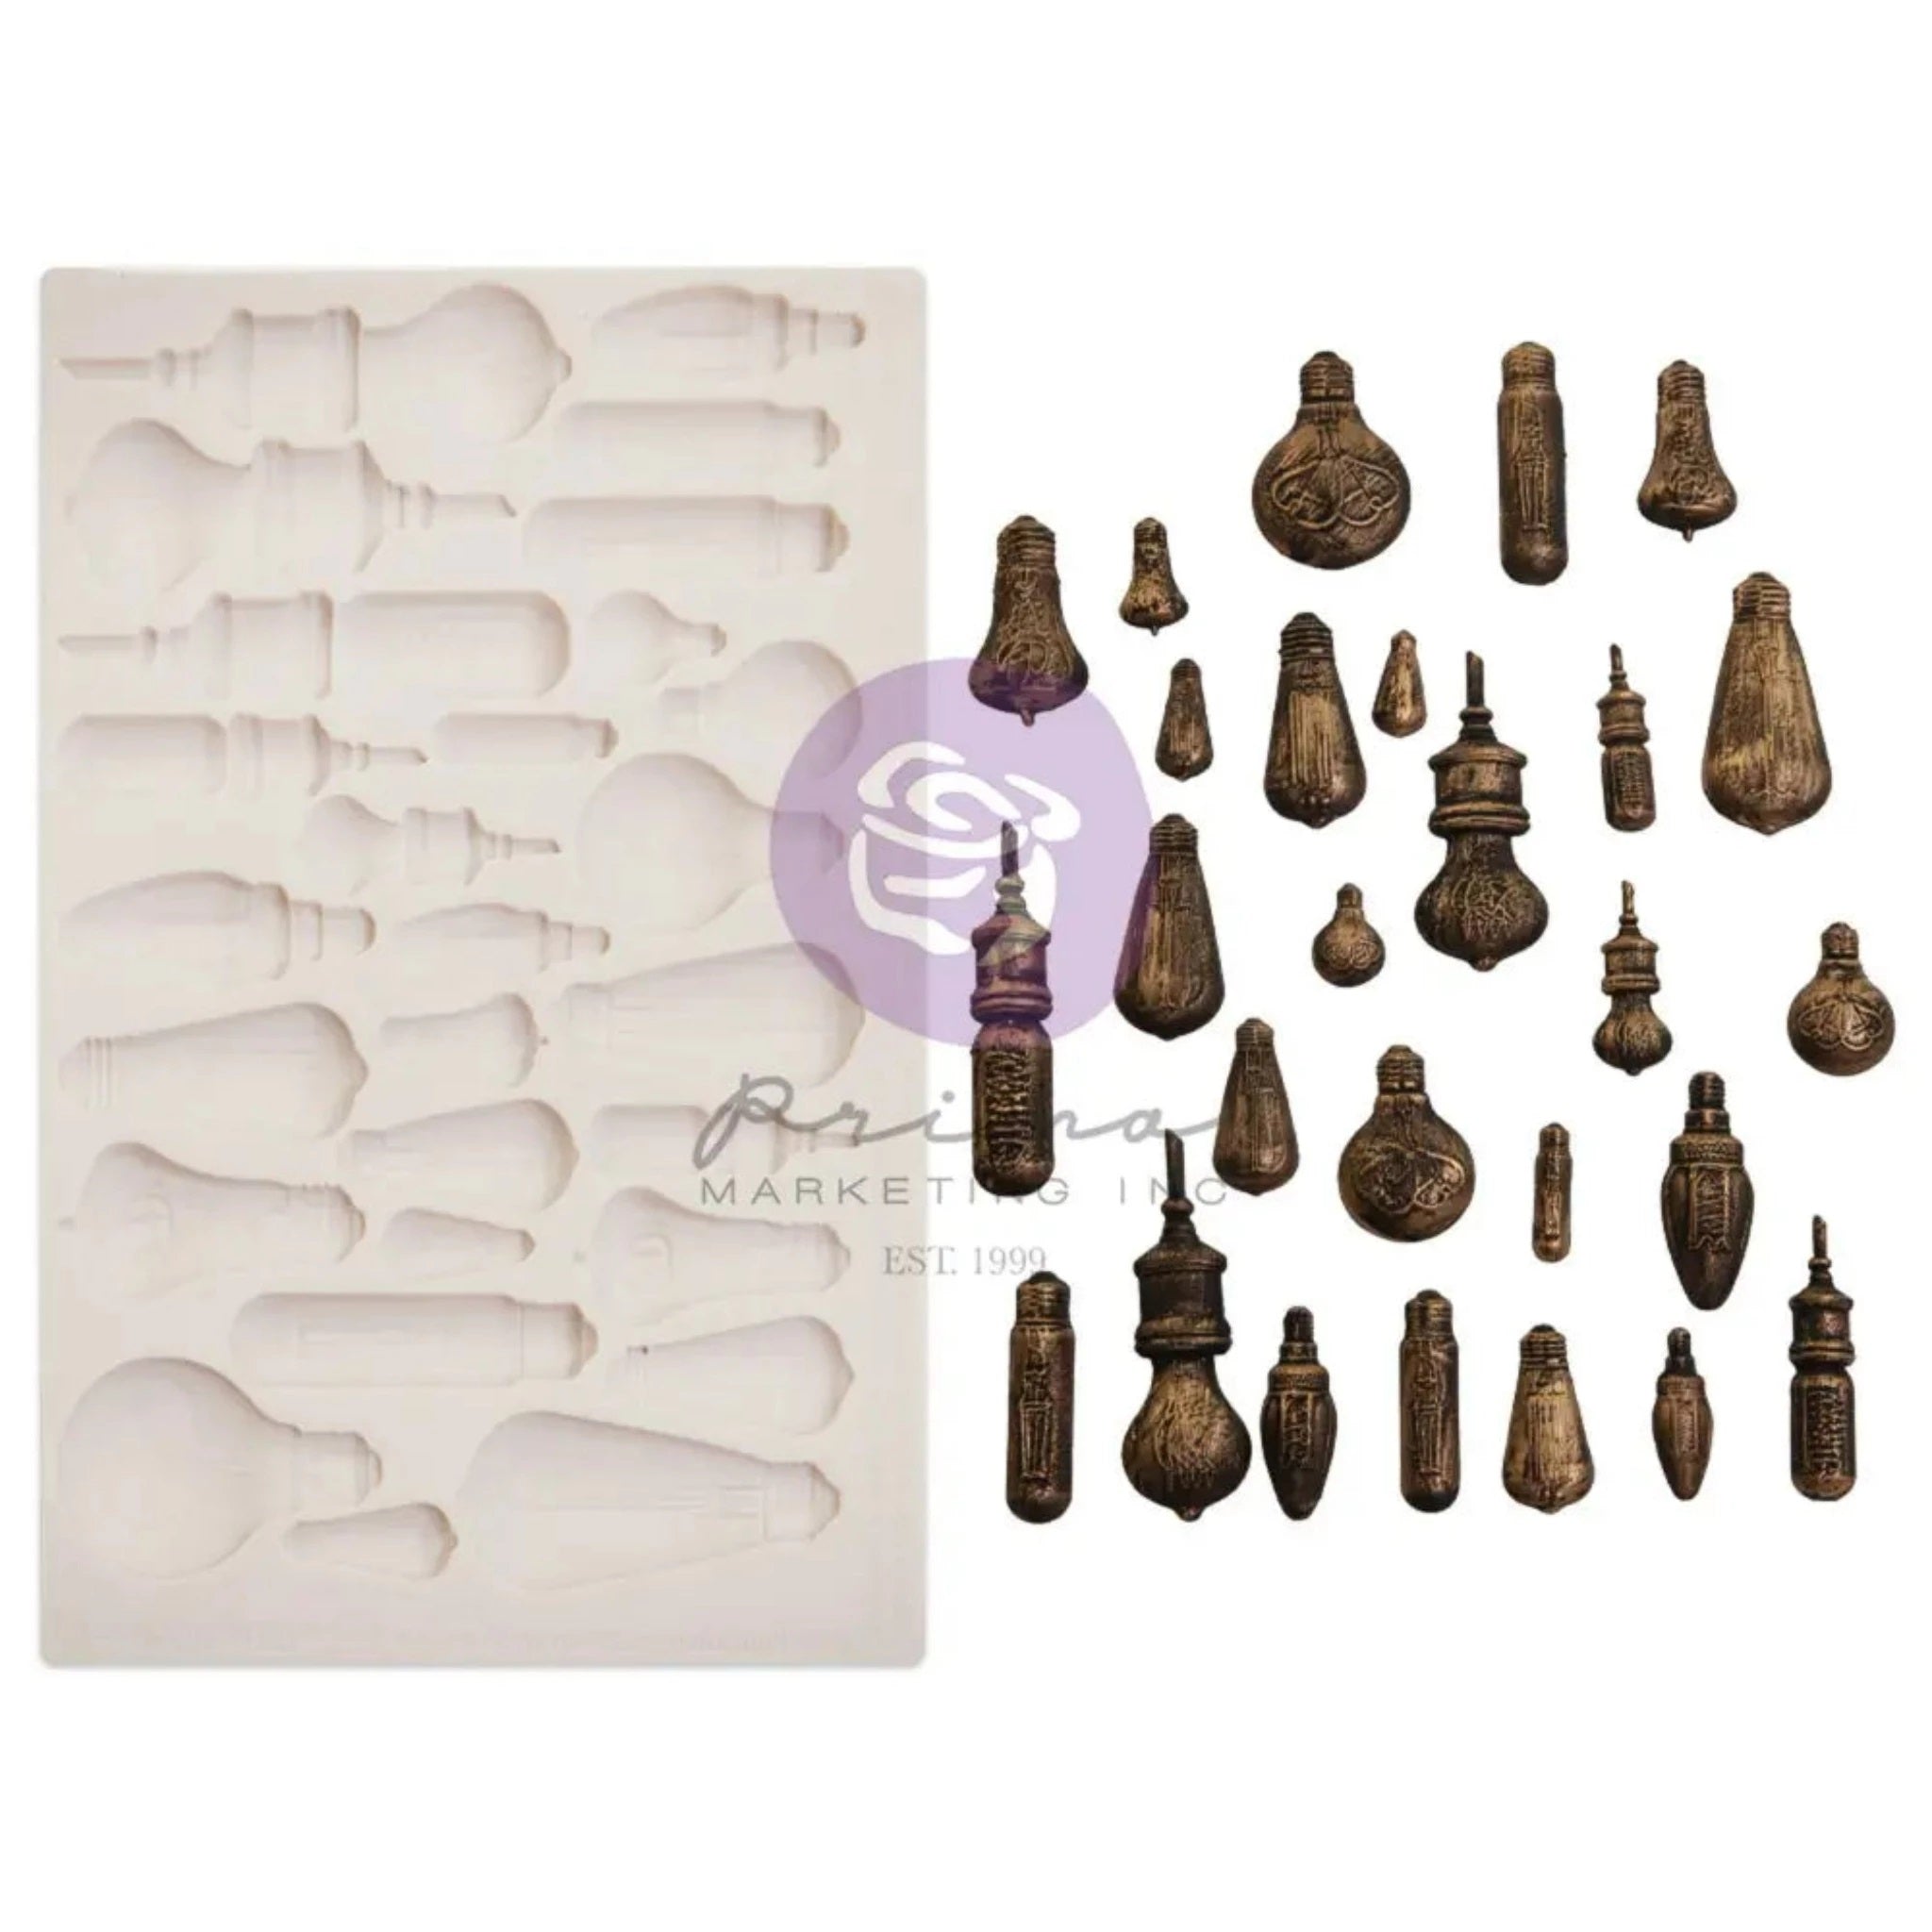 A beige silicone mold and bronze-colored castings of Finnabair's Vintage Light Bulbs are against a white background.